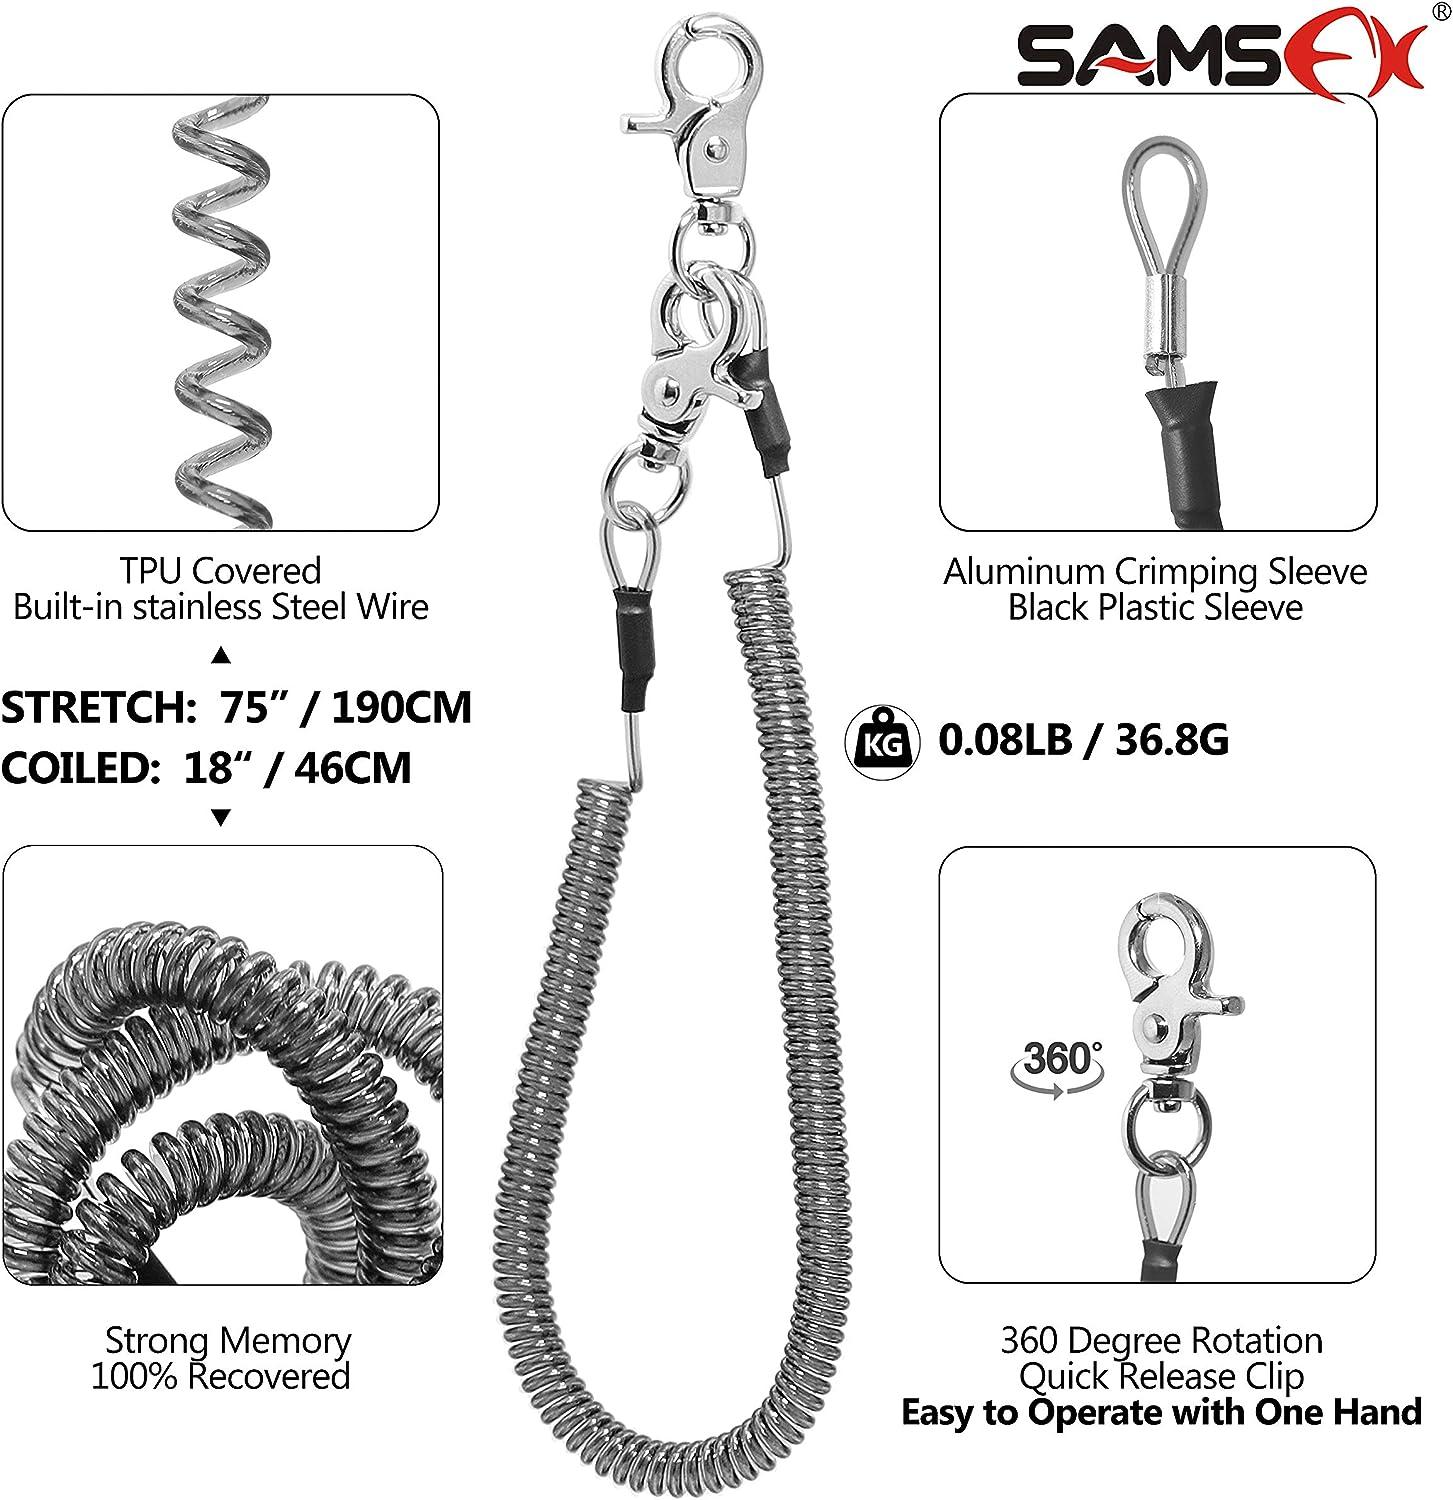 SAMSFX Fishing Strongest Magnetic Net Release Magnet Clip Holder Retractor  with Coiled Lanyard Textured Grip Magnet, Black